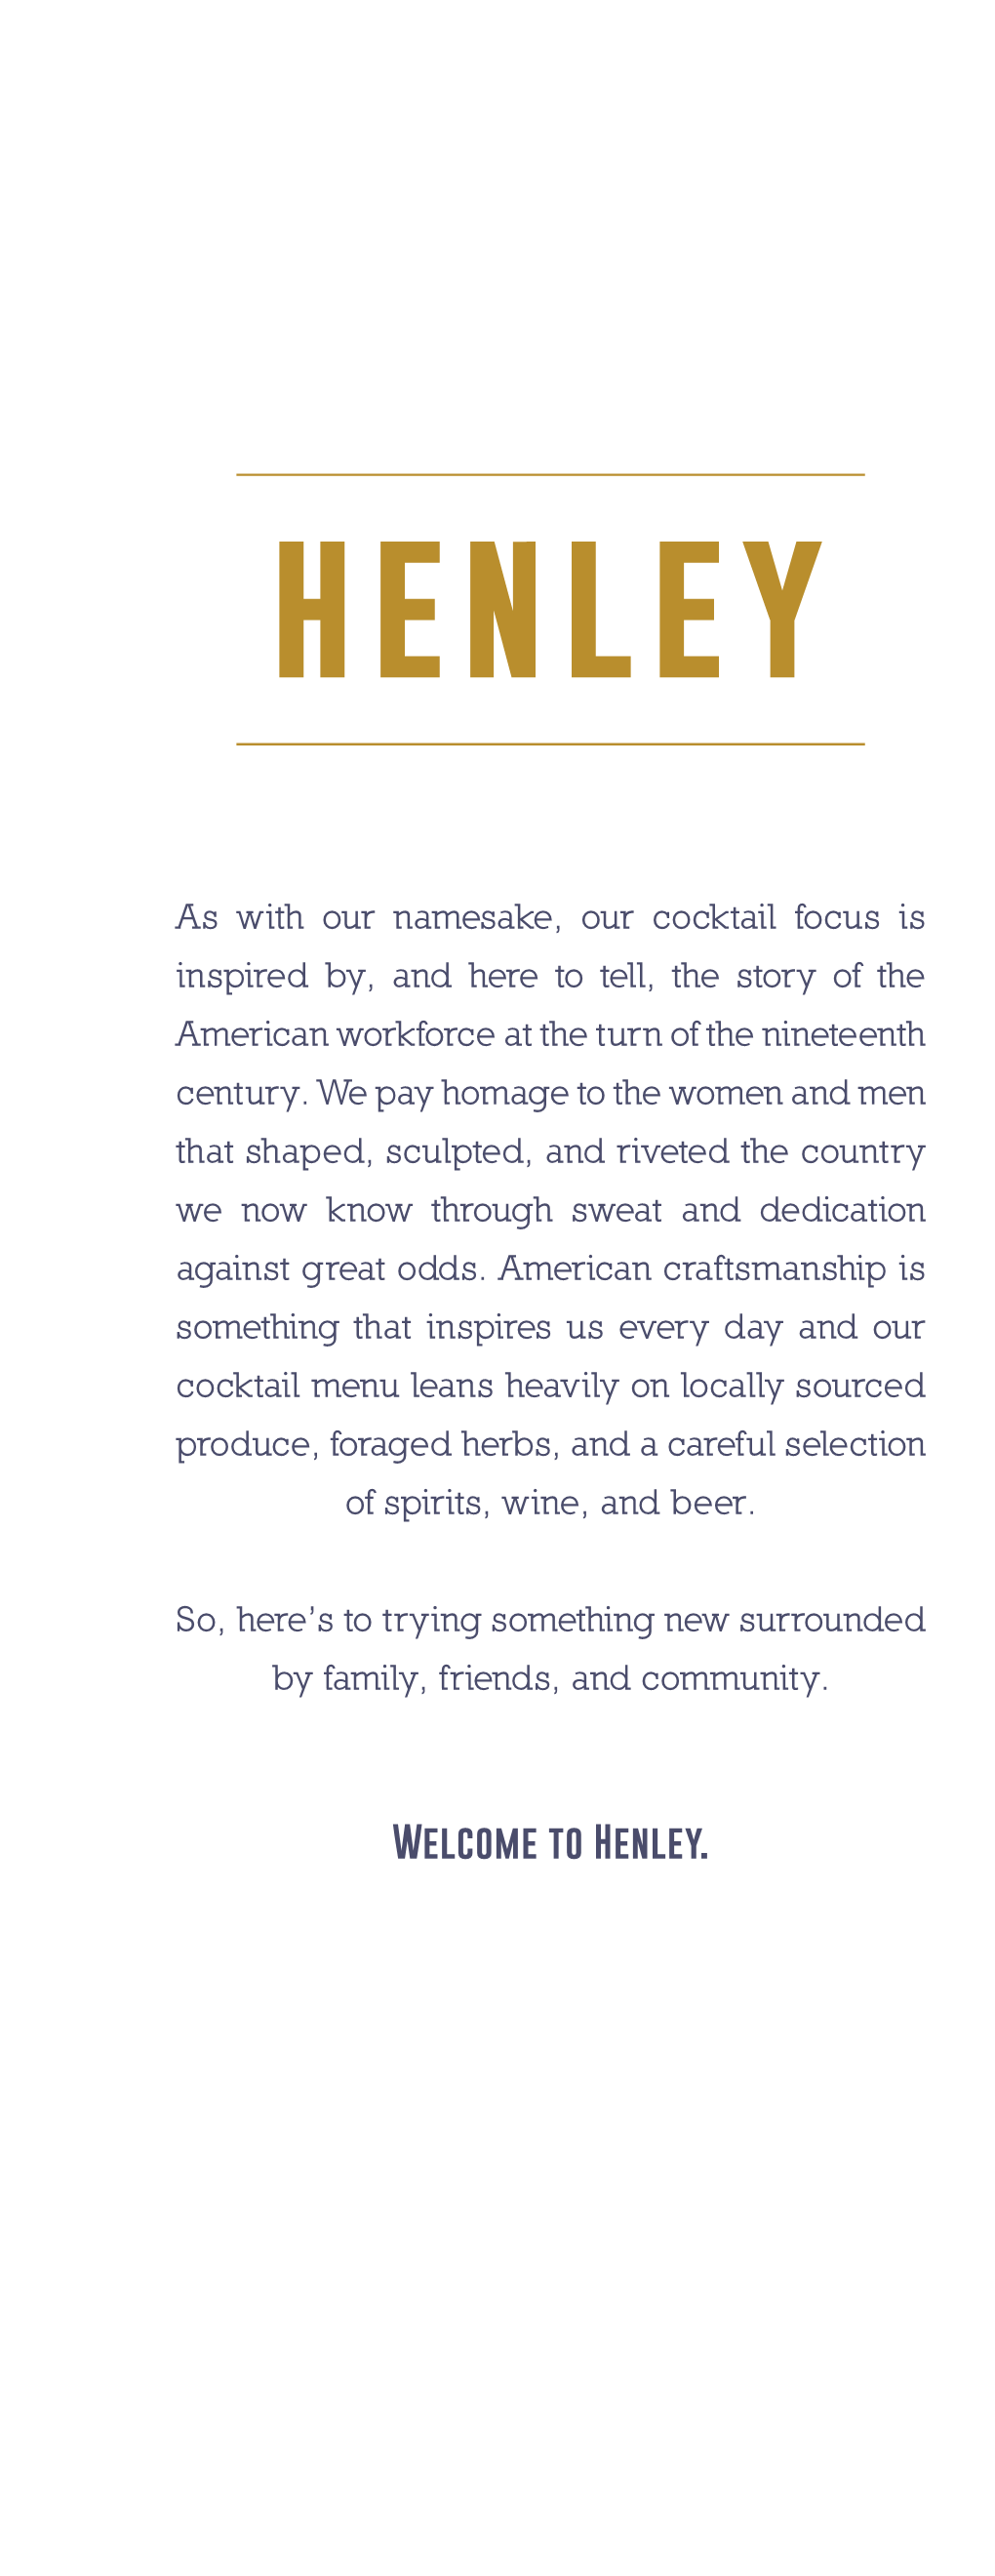 As with Our Namesake, Our Cocktail Focus Is Inspired By, and Here to Tell, the Story of the American Workforce at the Turn of the Nineteenth Century